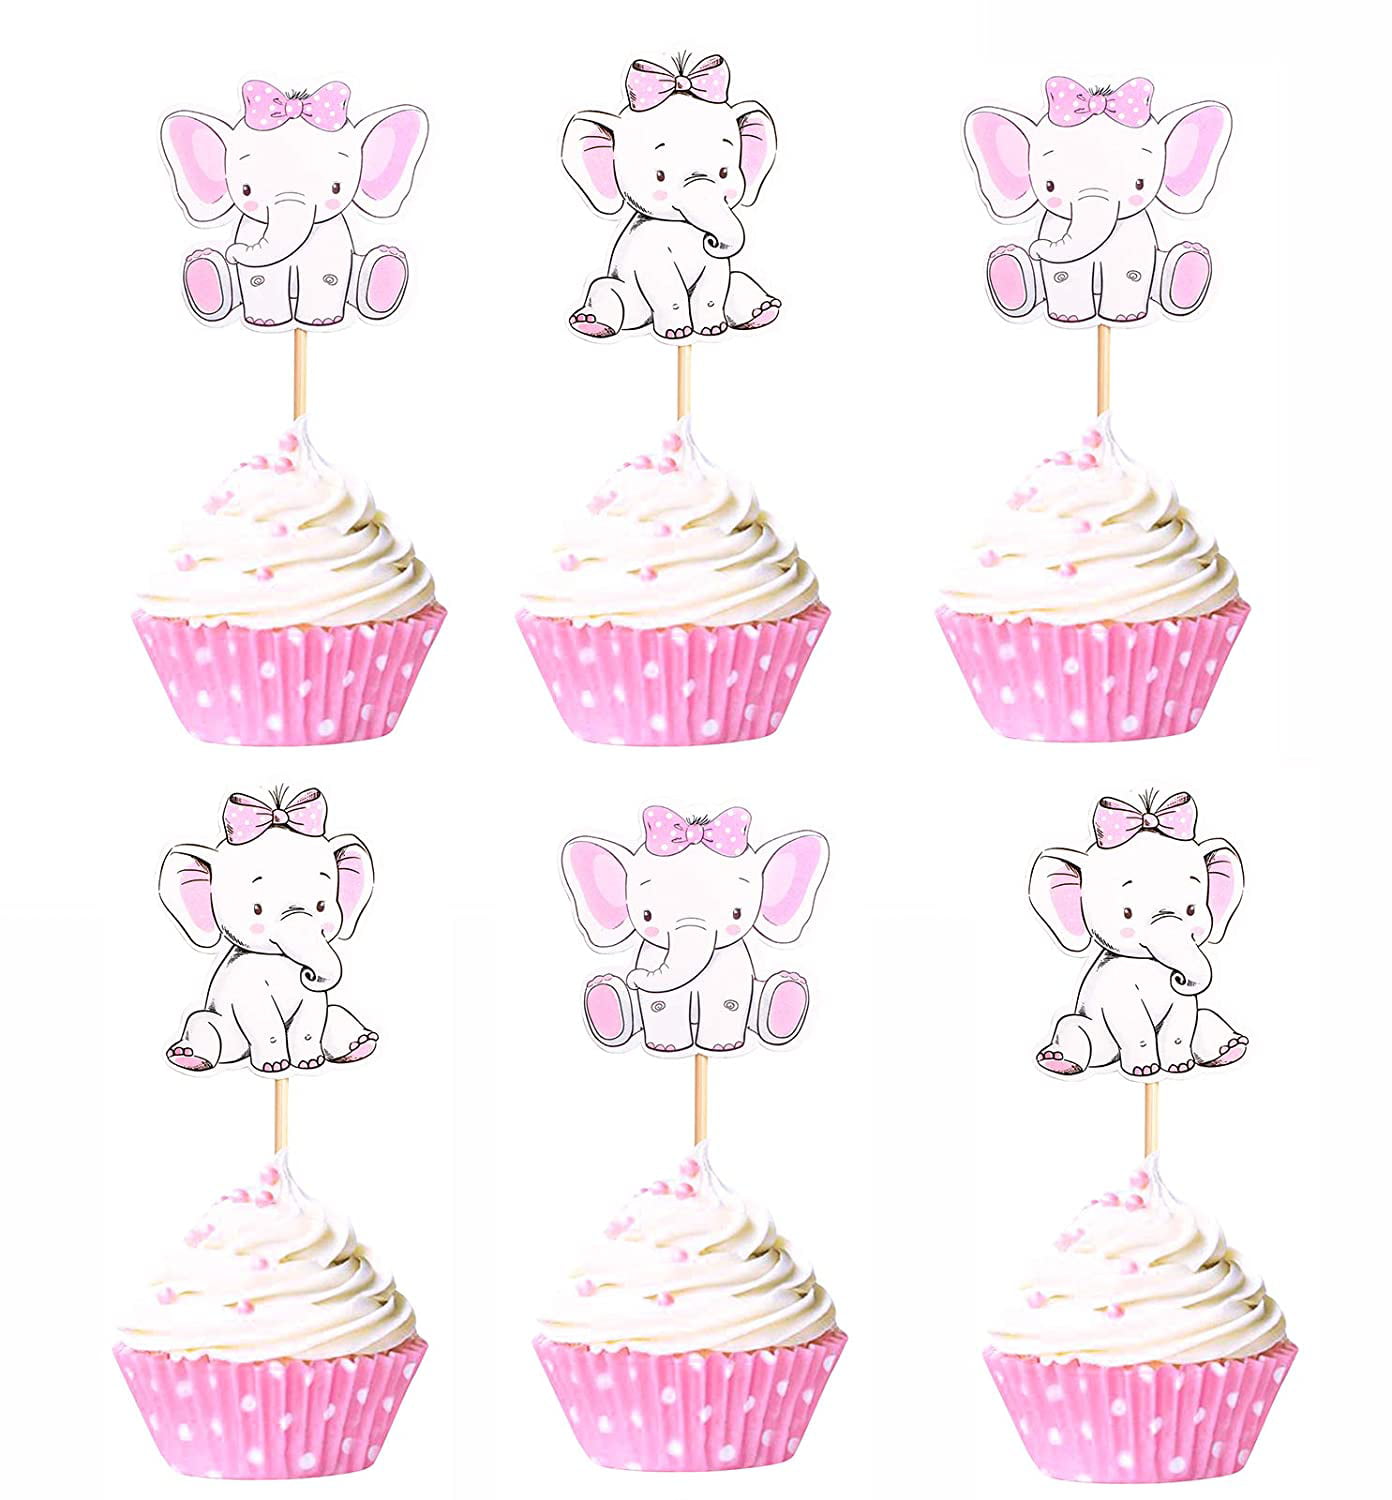 Baby Boy Girl Supreach Cute Blue Pink Elephant Birthday Cupcake Toppers Picks for Baby Shower Cake Decoration Set of 16 Pcs Party Supplies Girl 